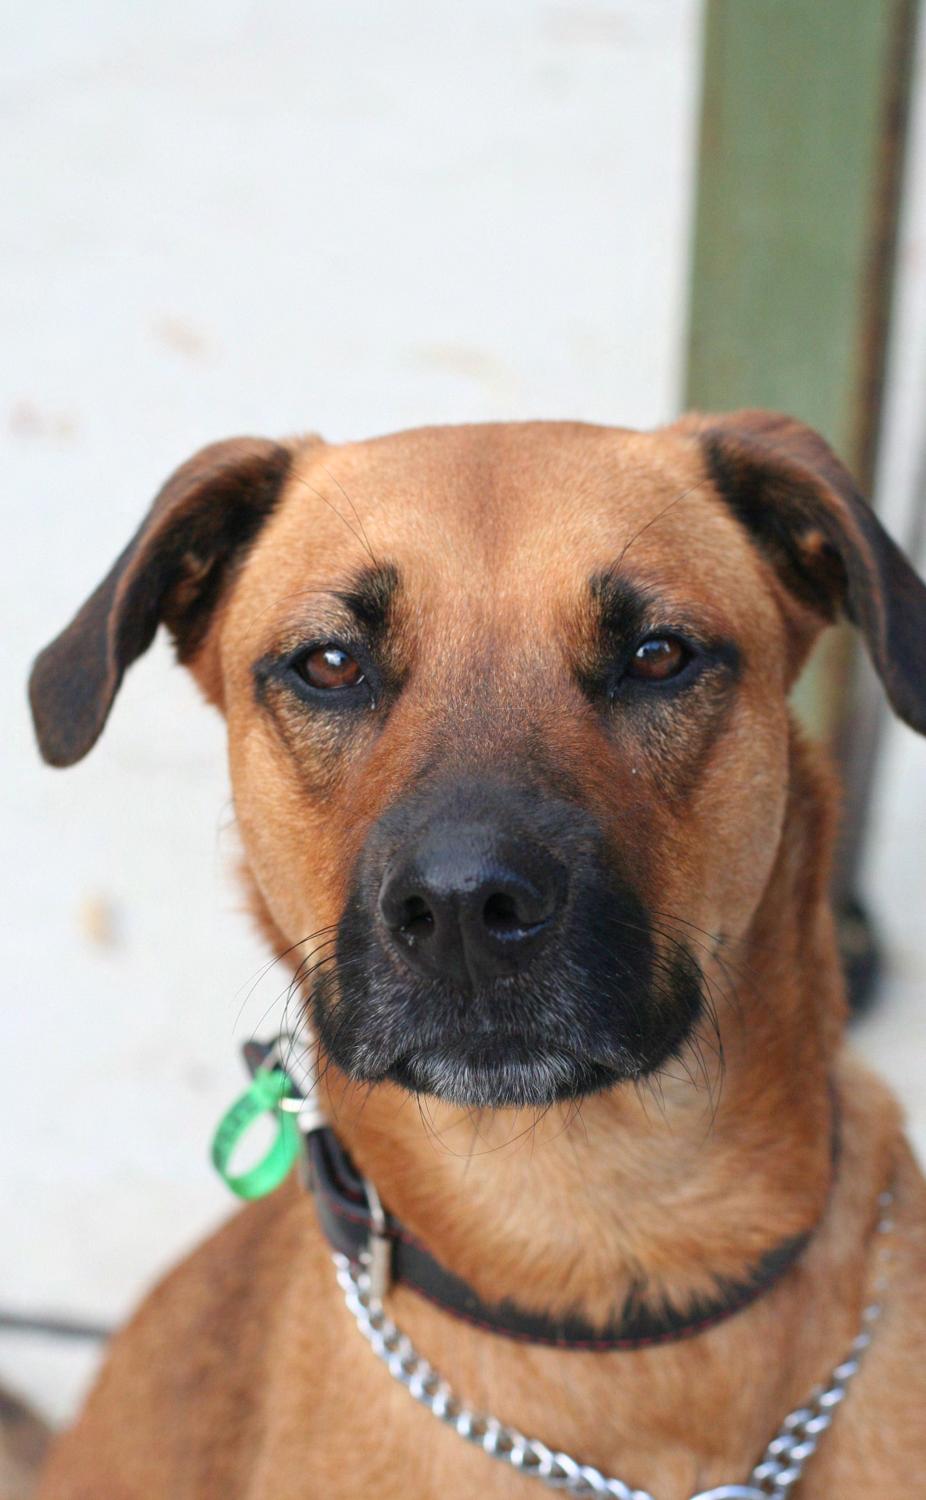 Billy is exceptionally friendly and loves to run. He is happiest jogging along beside you, or fetching his ball in the backyard.